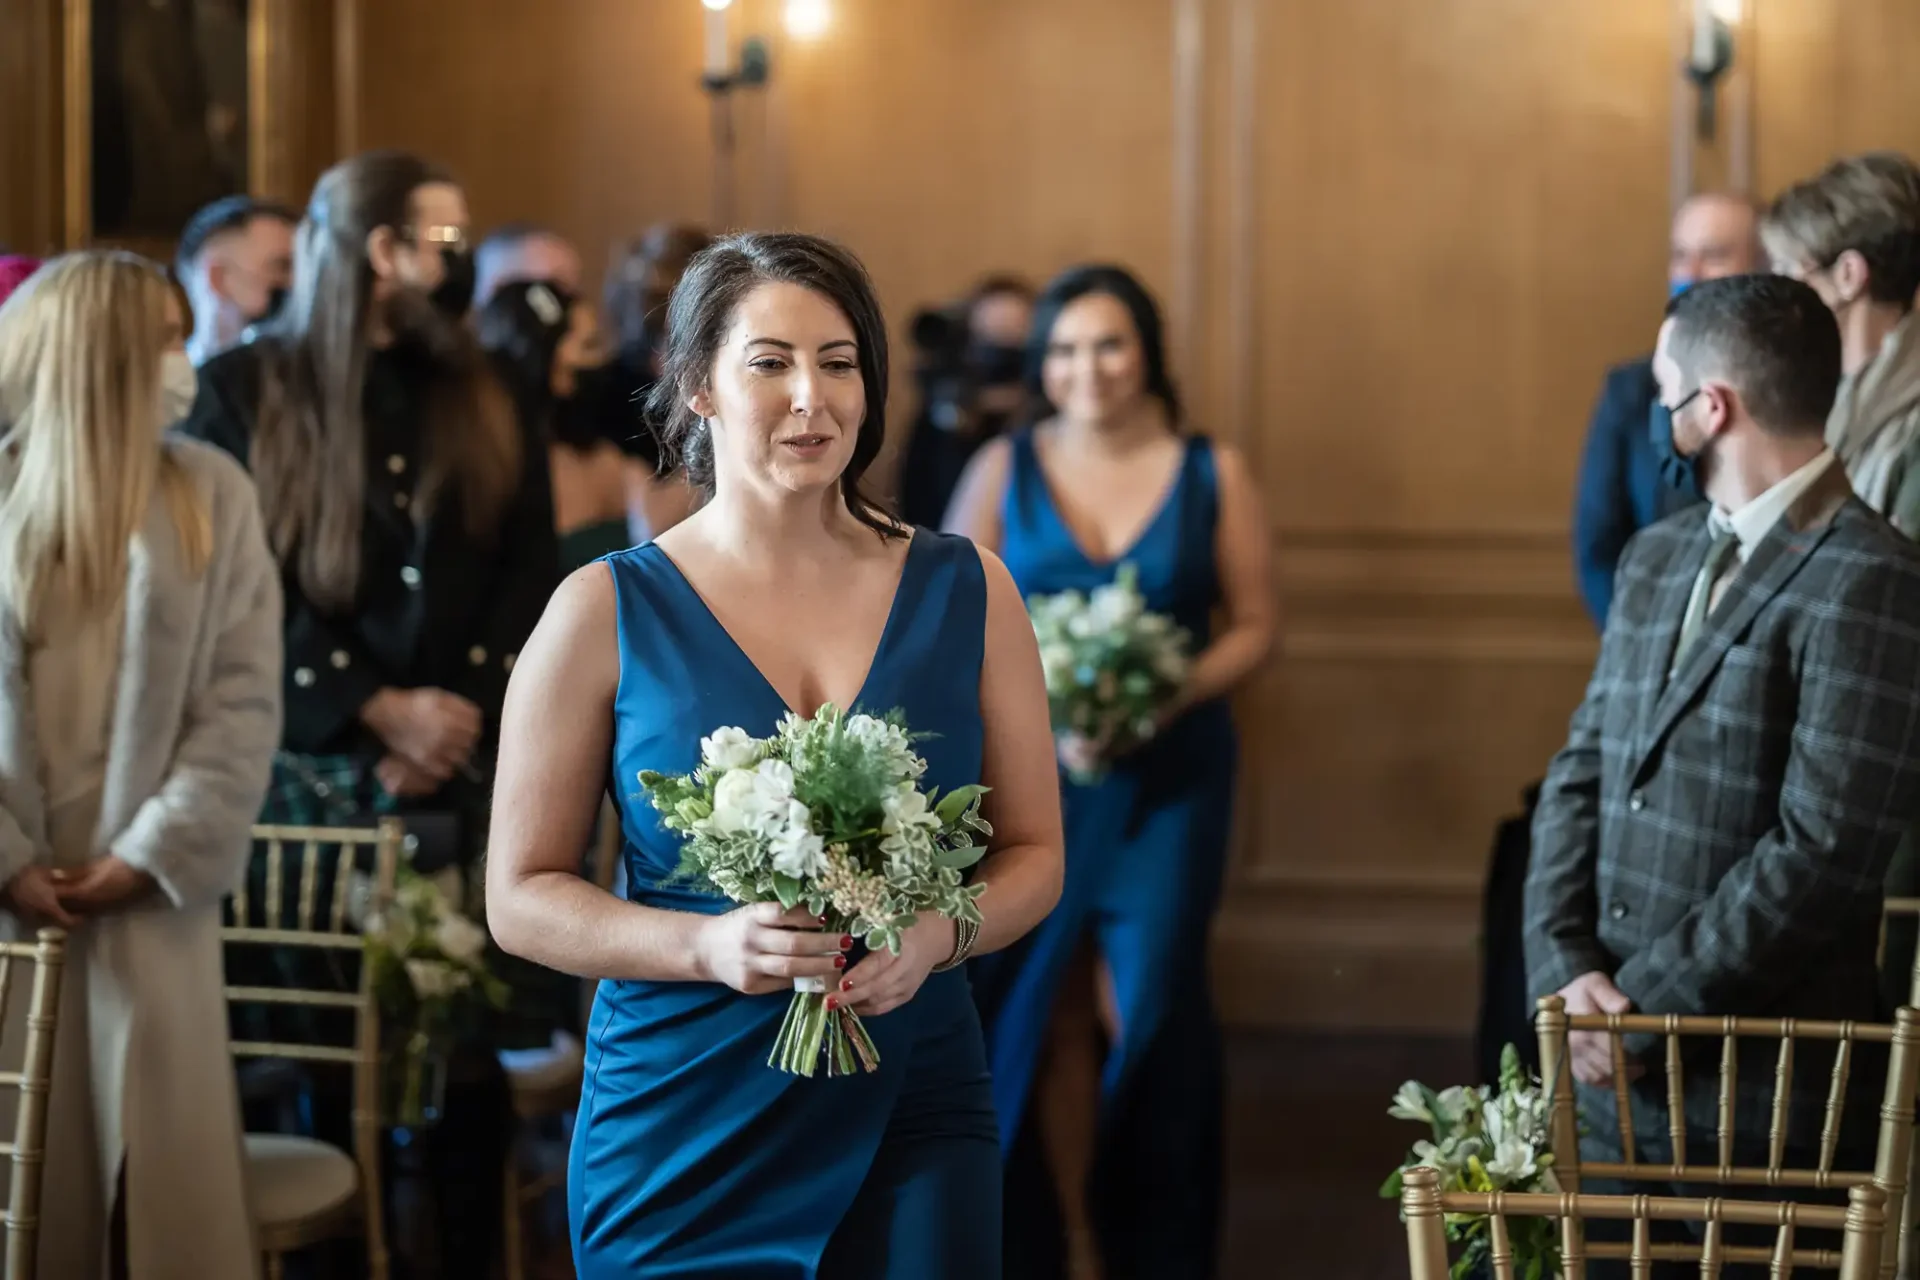 A woman in a blue dress walks down the aisle holding a bouquet, with wedding guests watching from their seats.